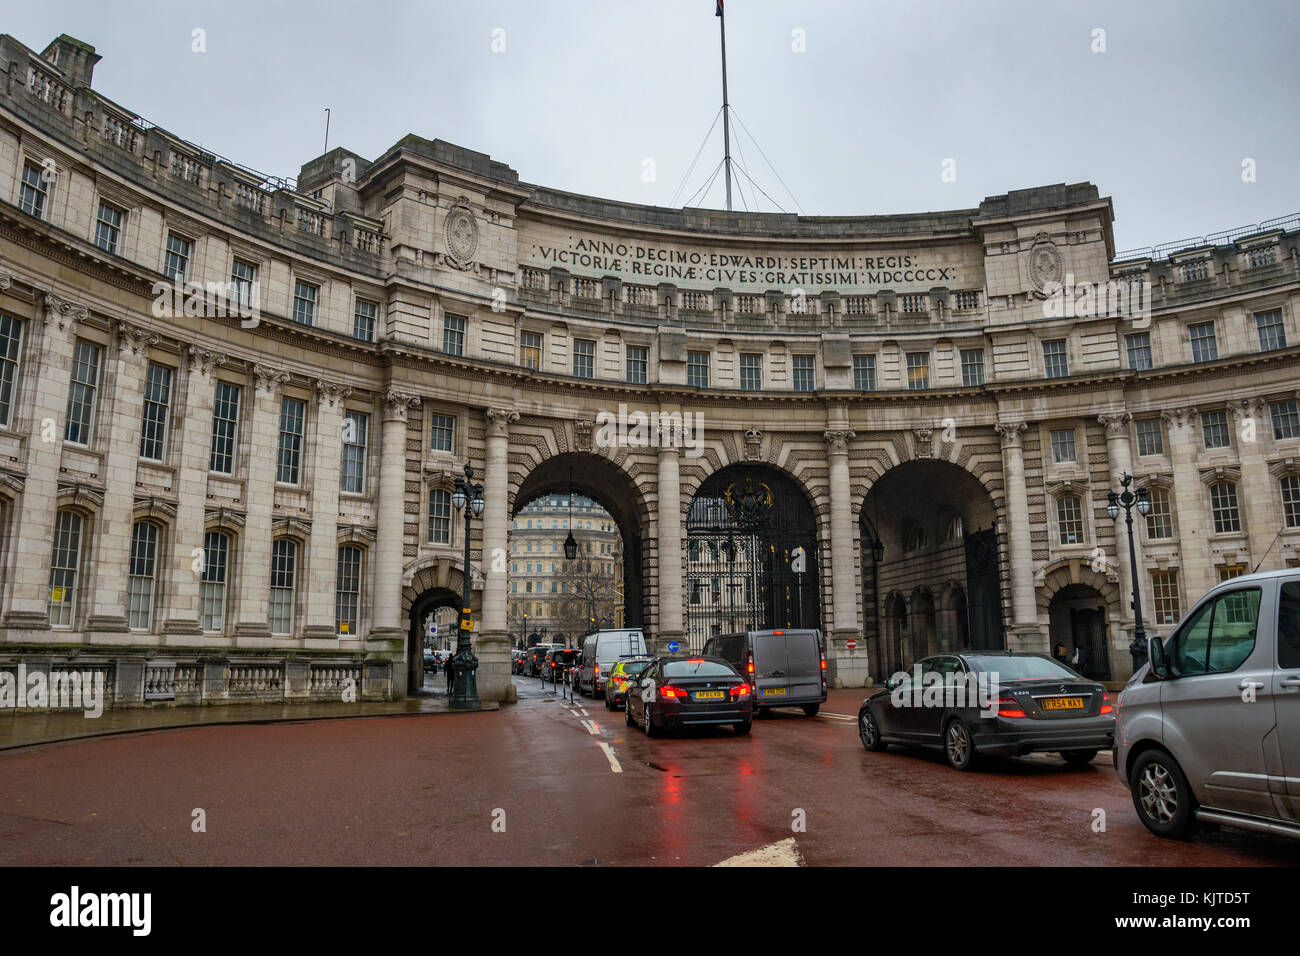 Admiralty Arch is a landmark building in London which incorporates an archway providing road and pedestrian access between The Mall and Trafalgar Squa Stock Photo